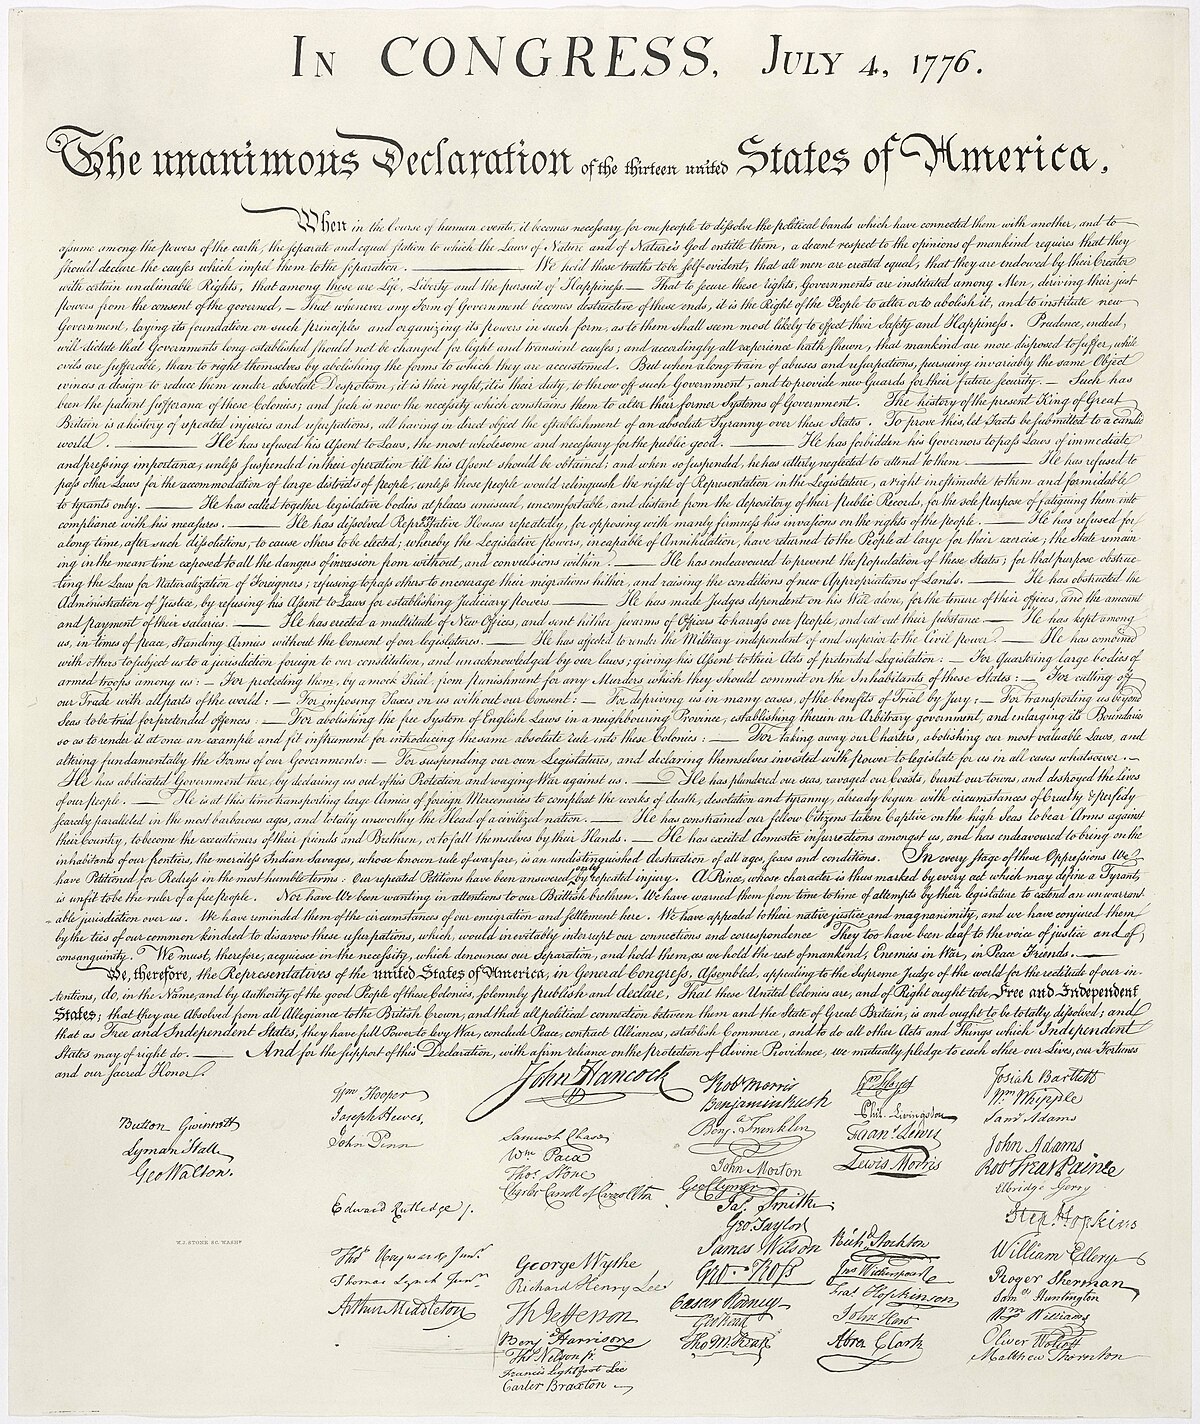 1200px-United_States_Declaration_of_Independence.jpg